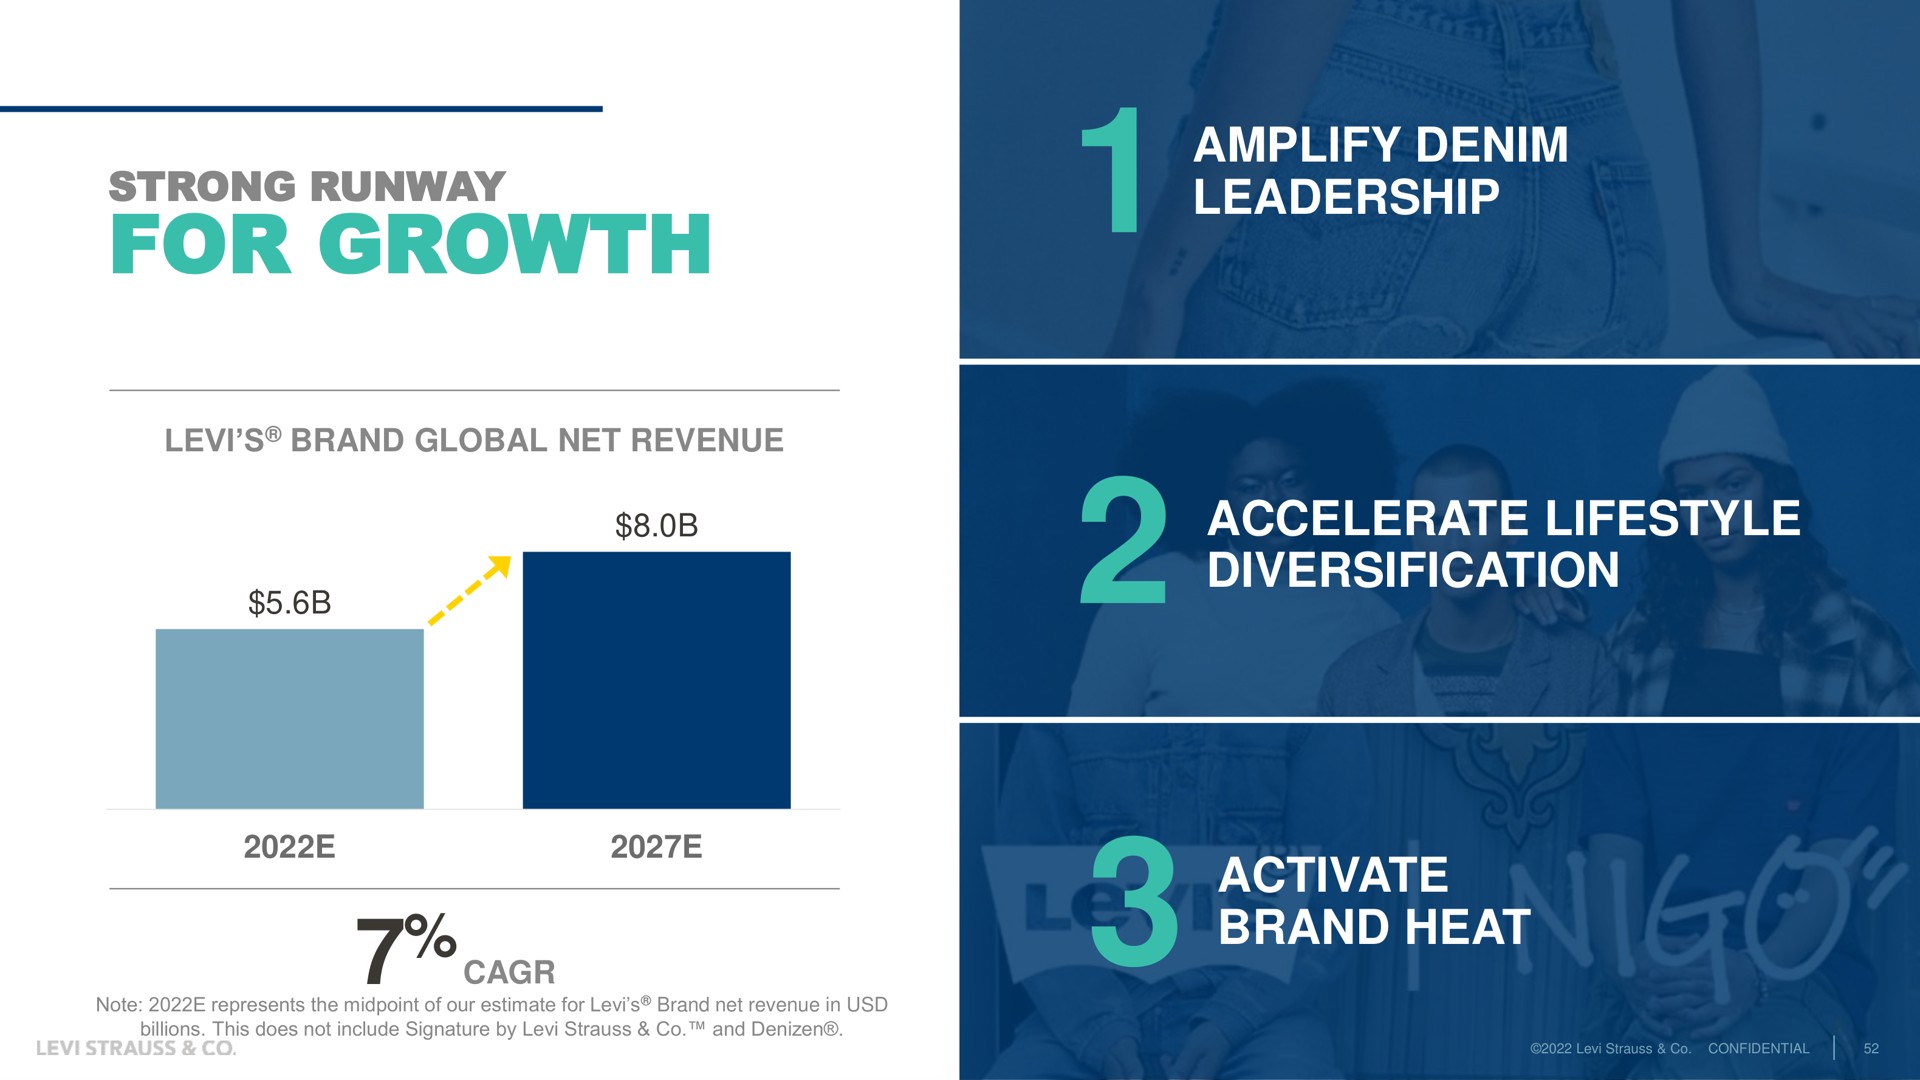 strong runway for growth amplify denim leadership accelerate diversification activate brand heat global net revenue | Levi Strauss